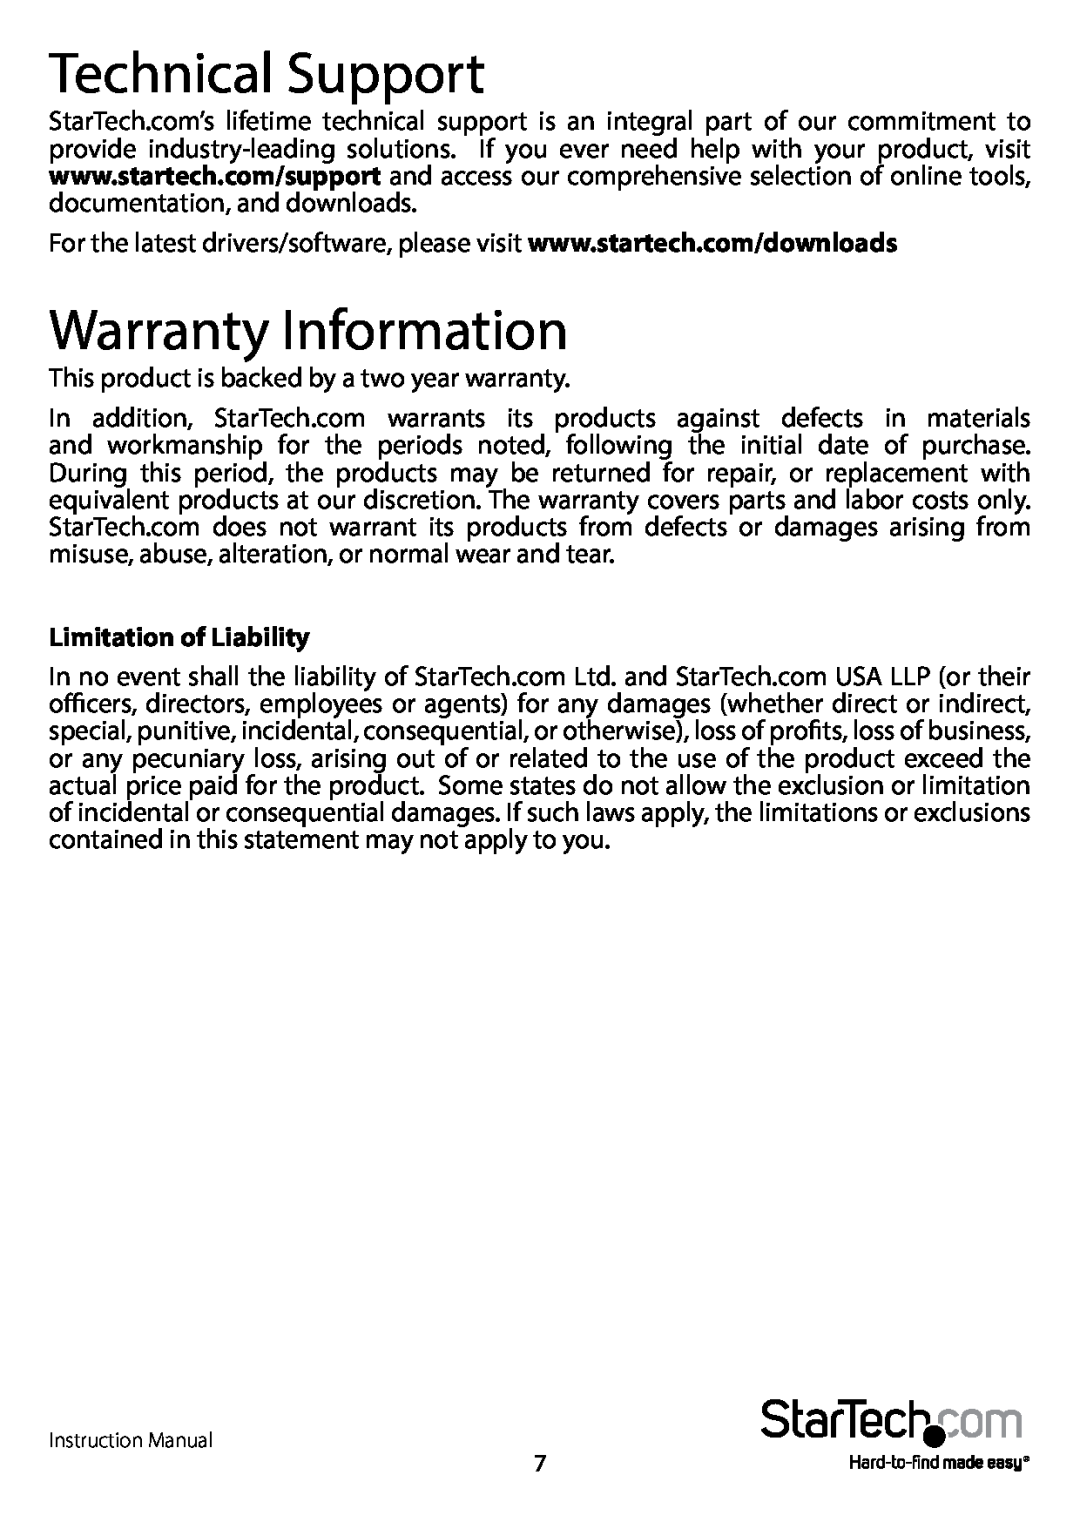 StarTech.com RS232 manual Technical Support, Warranty Information, Limitation of Liability 